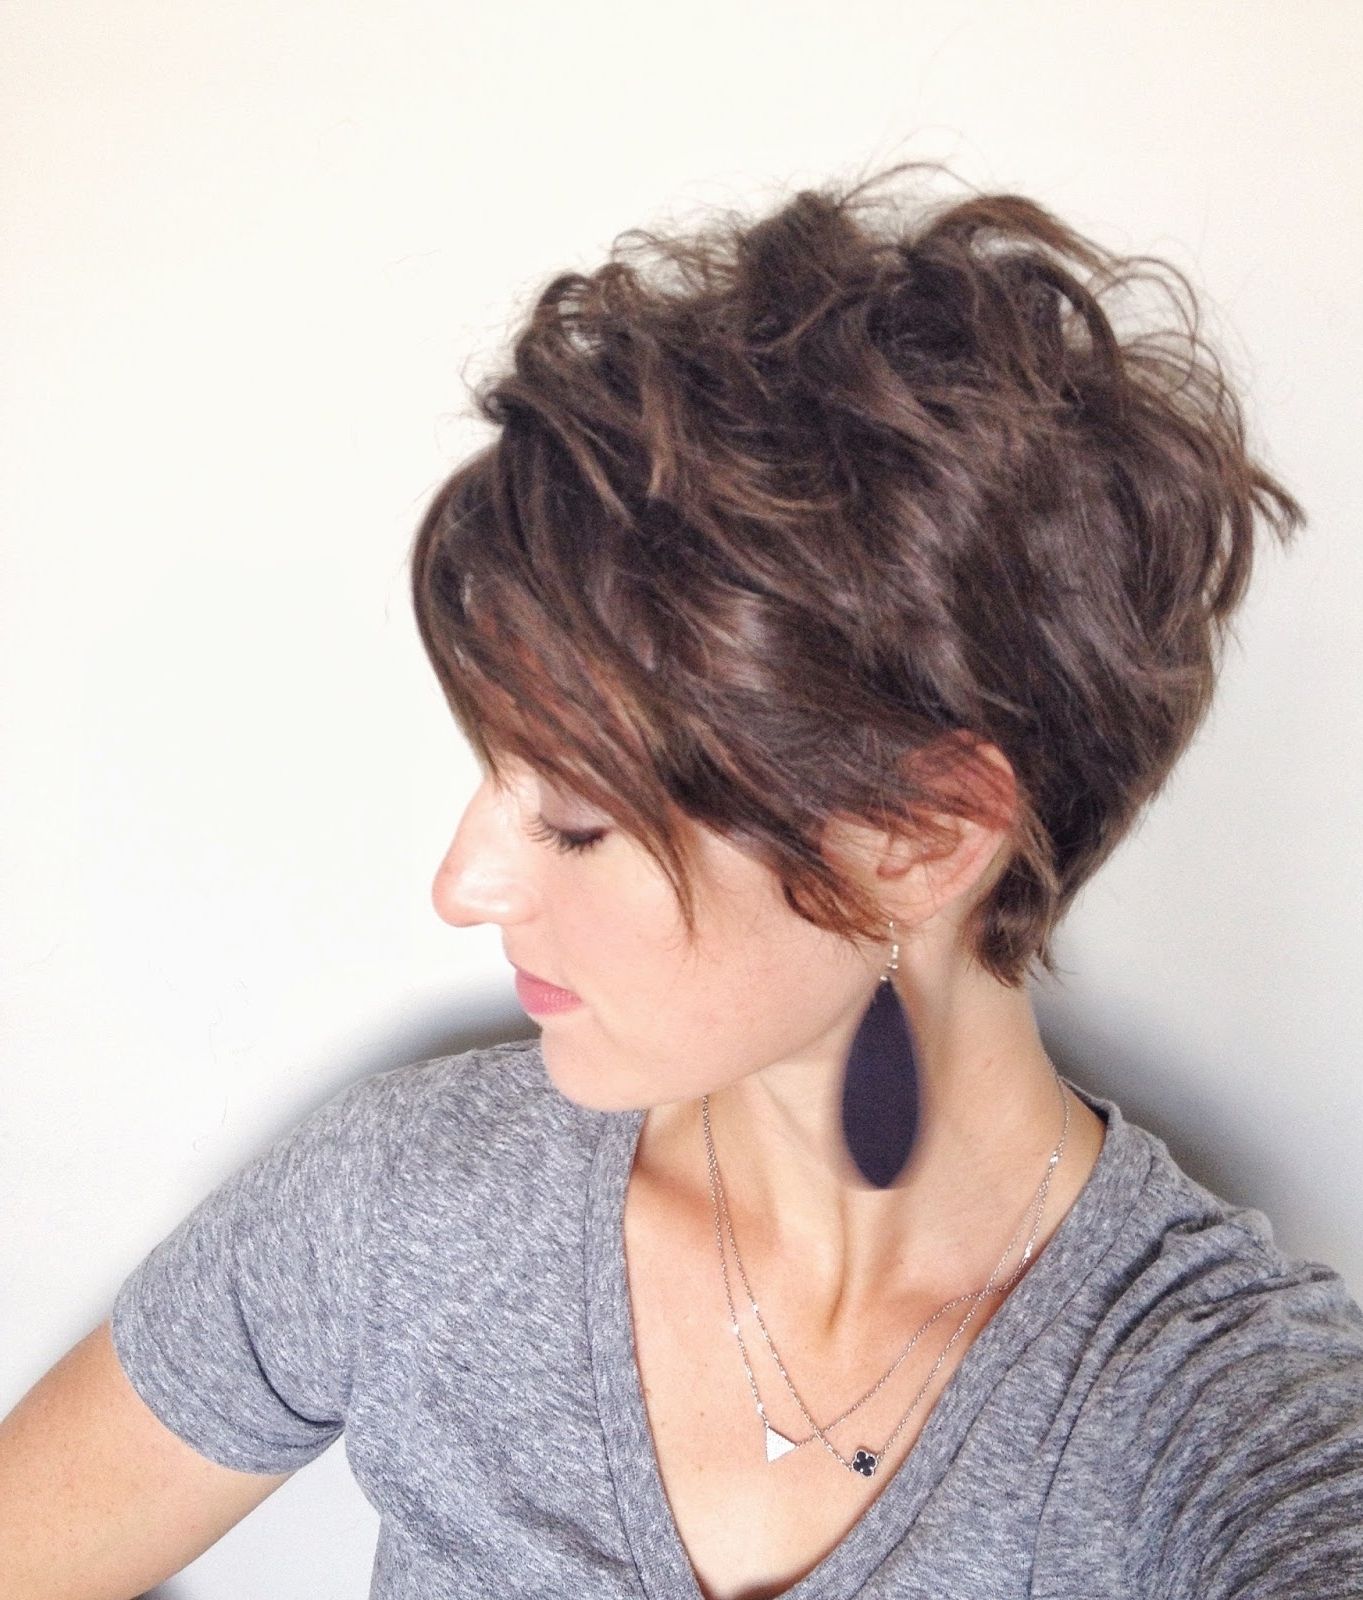 Maybe Matilda: Asymmetrical Pixie Cut | Hairstyles I Like With Regard To 2018 Fringe Pixie Hairstyles (View 9 of 15)